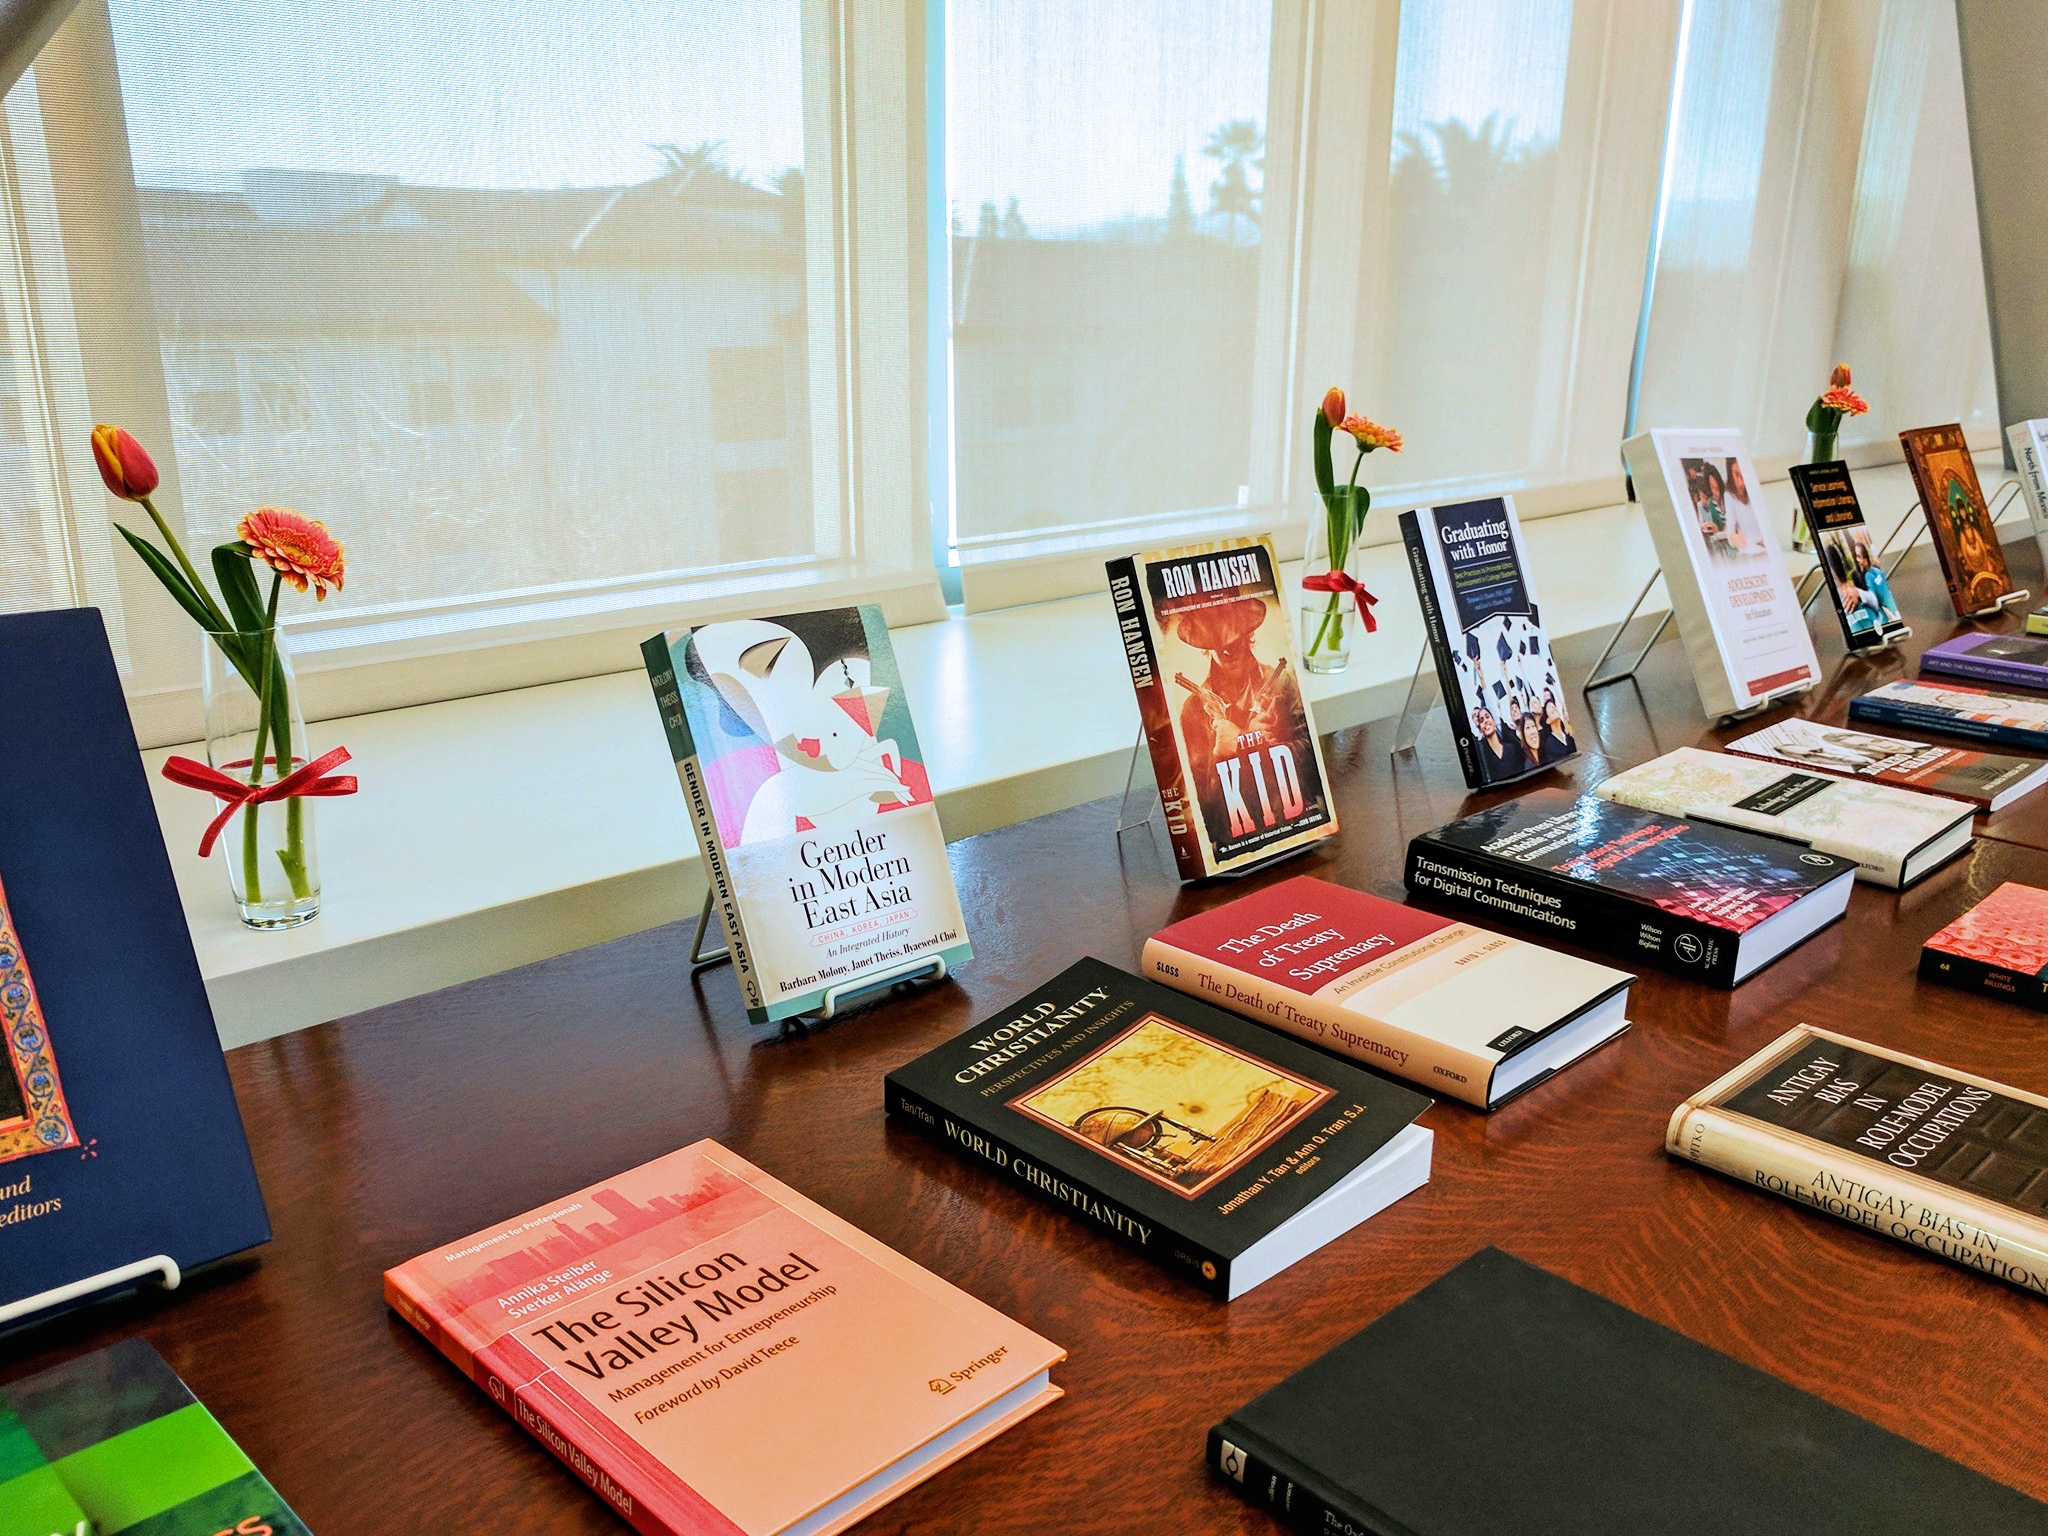 We celebrated faculty authors and editors at the annual New Publications reception